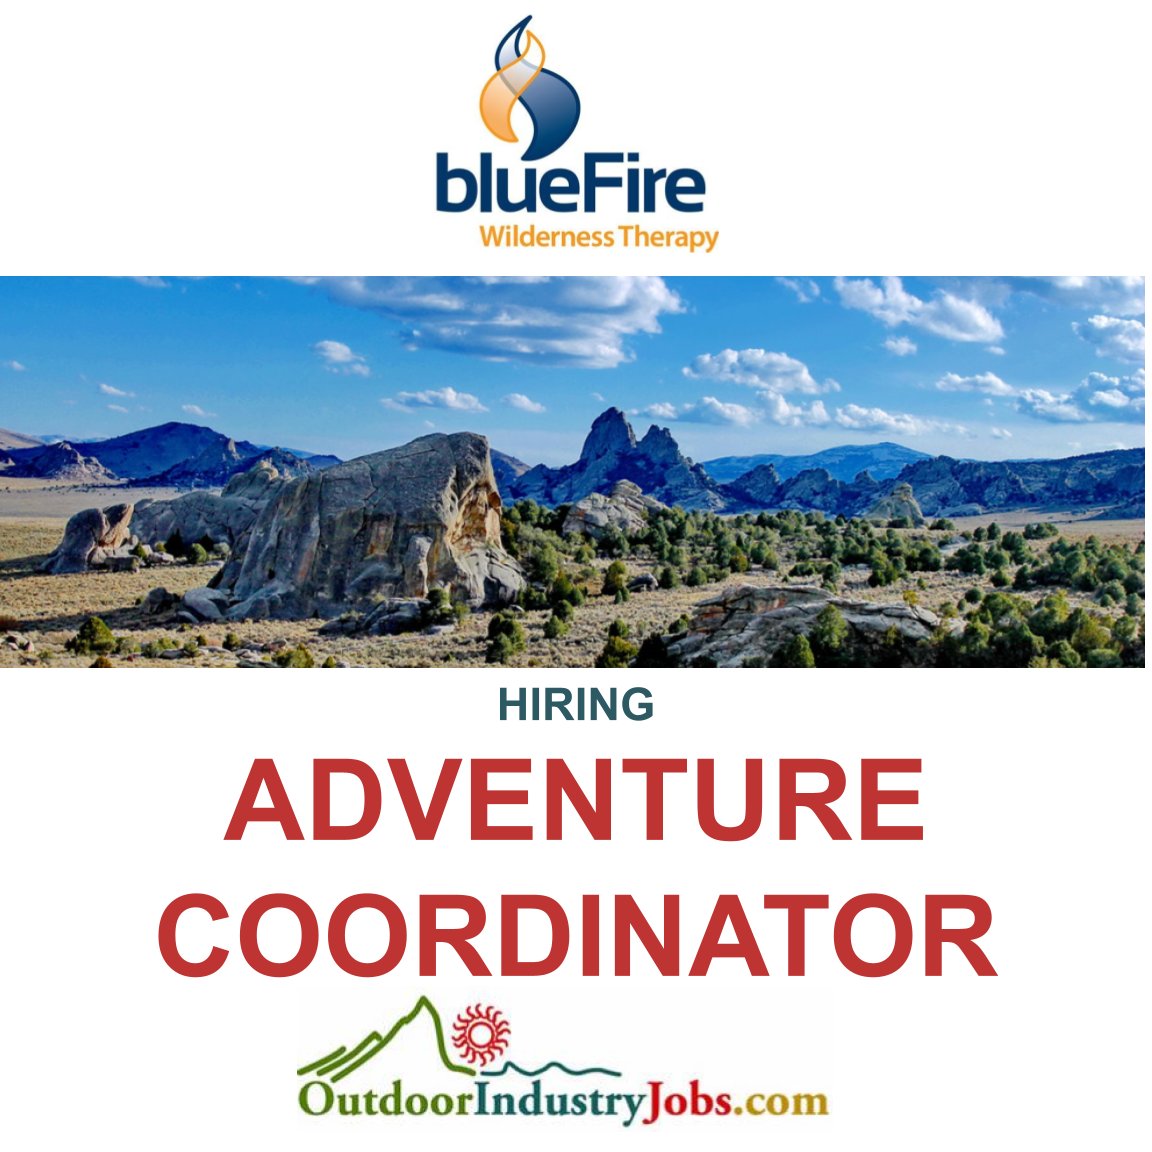 Apply Here: outdoorindustryjobs.com/JobDetail/GetJ…

#outdoorindustryjobs #bluefirewildernesstherapy #outdooreducation #outdooreducator#campcounselor #campcounselors #wildernesstherapy #naturetherapy  #outdoortherapy #therapy #teacher #coordinator
@BlueFireWild